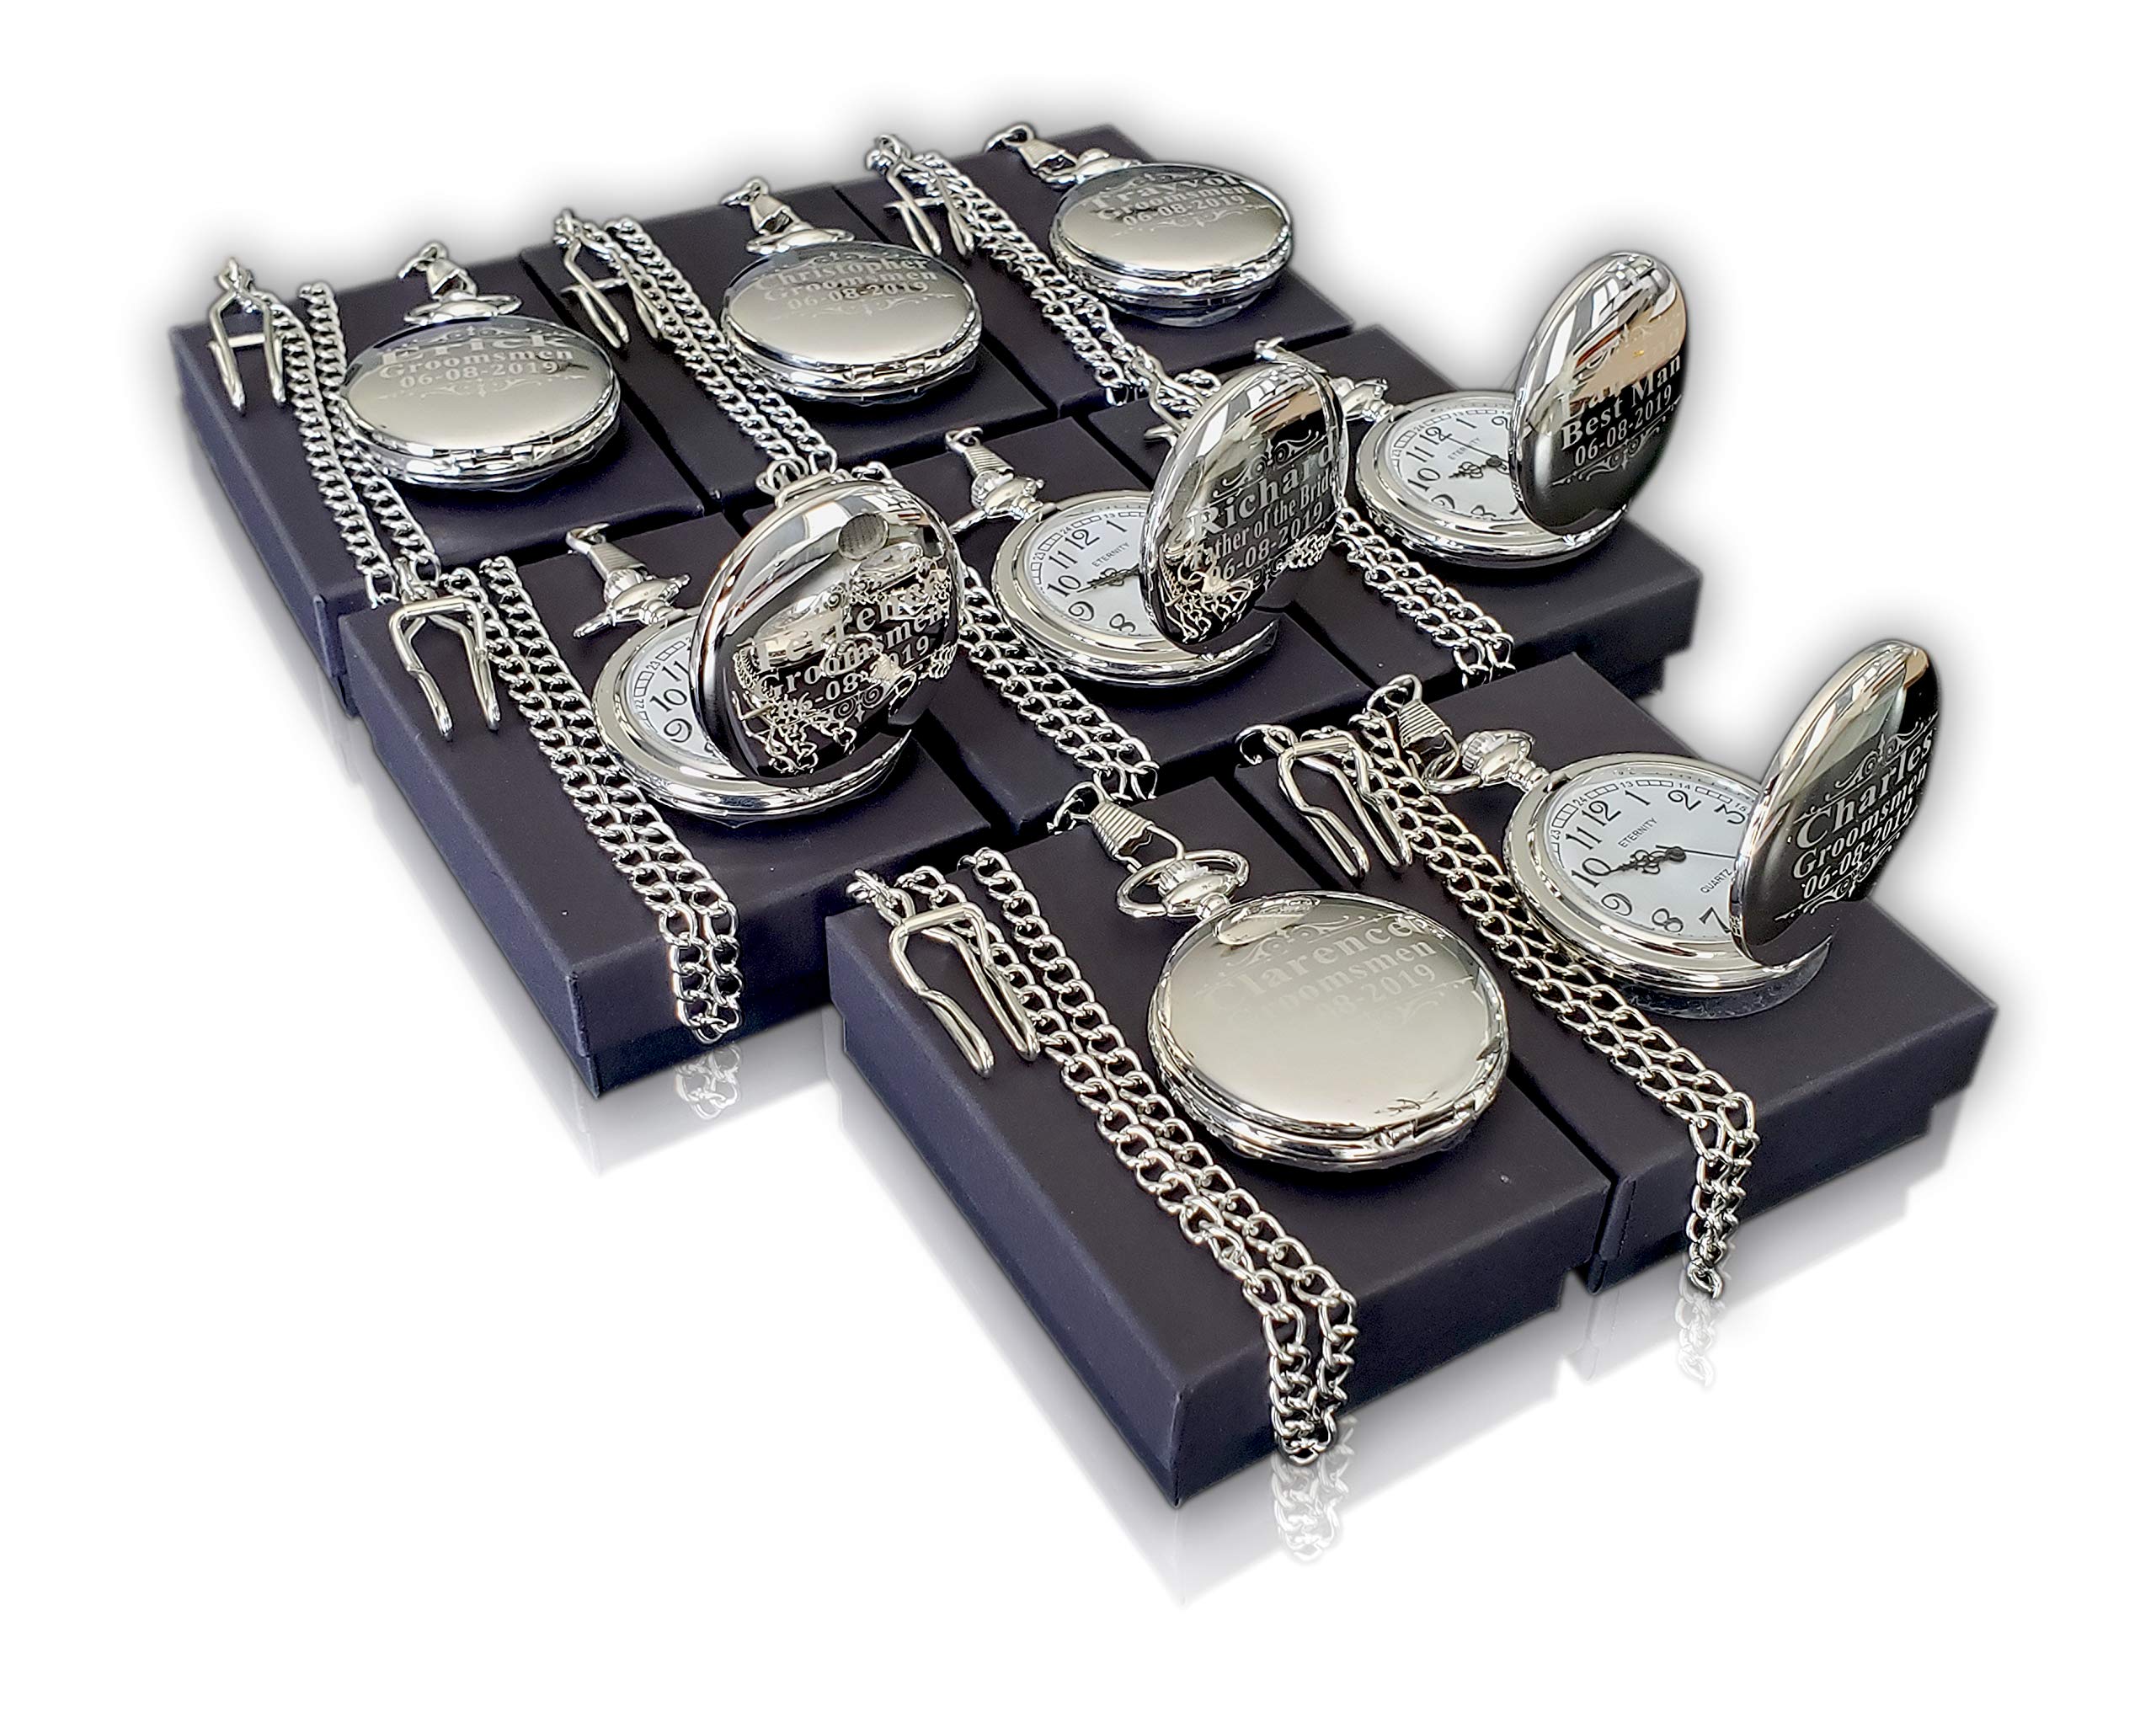 Eternity Engraving inc. 8 Engraved Pocket Watches Custom Fitted Box Included, Buckle Chain, Engraving Included. Pocket Watch, Battery Included, Assorted Colors Set of 8